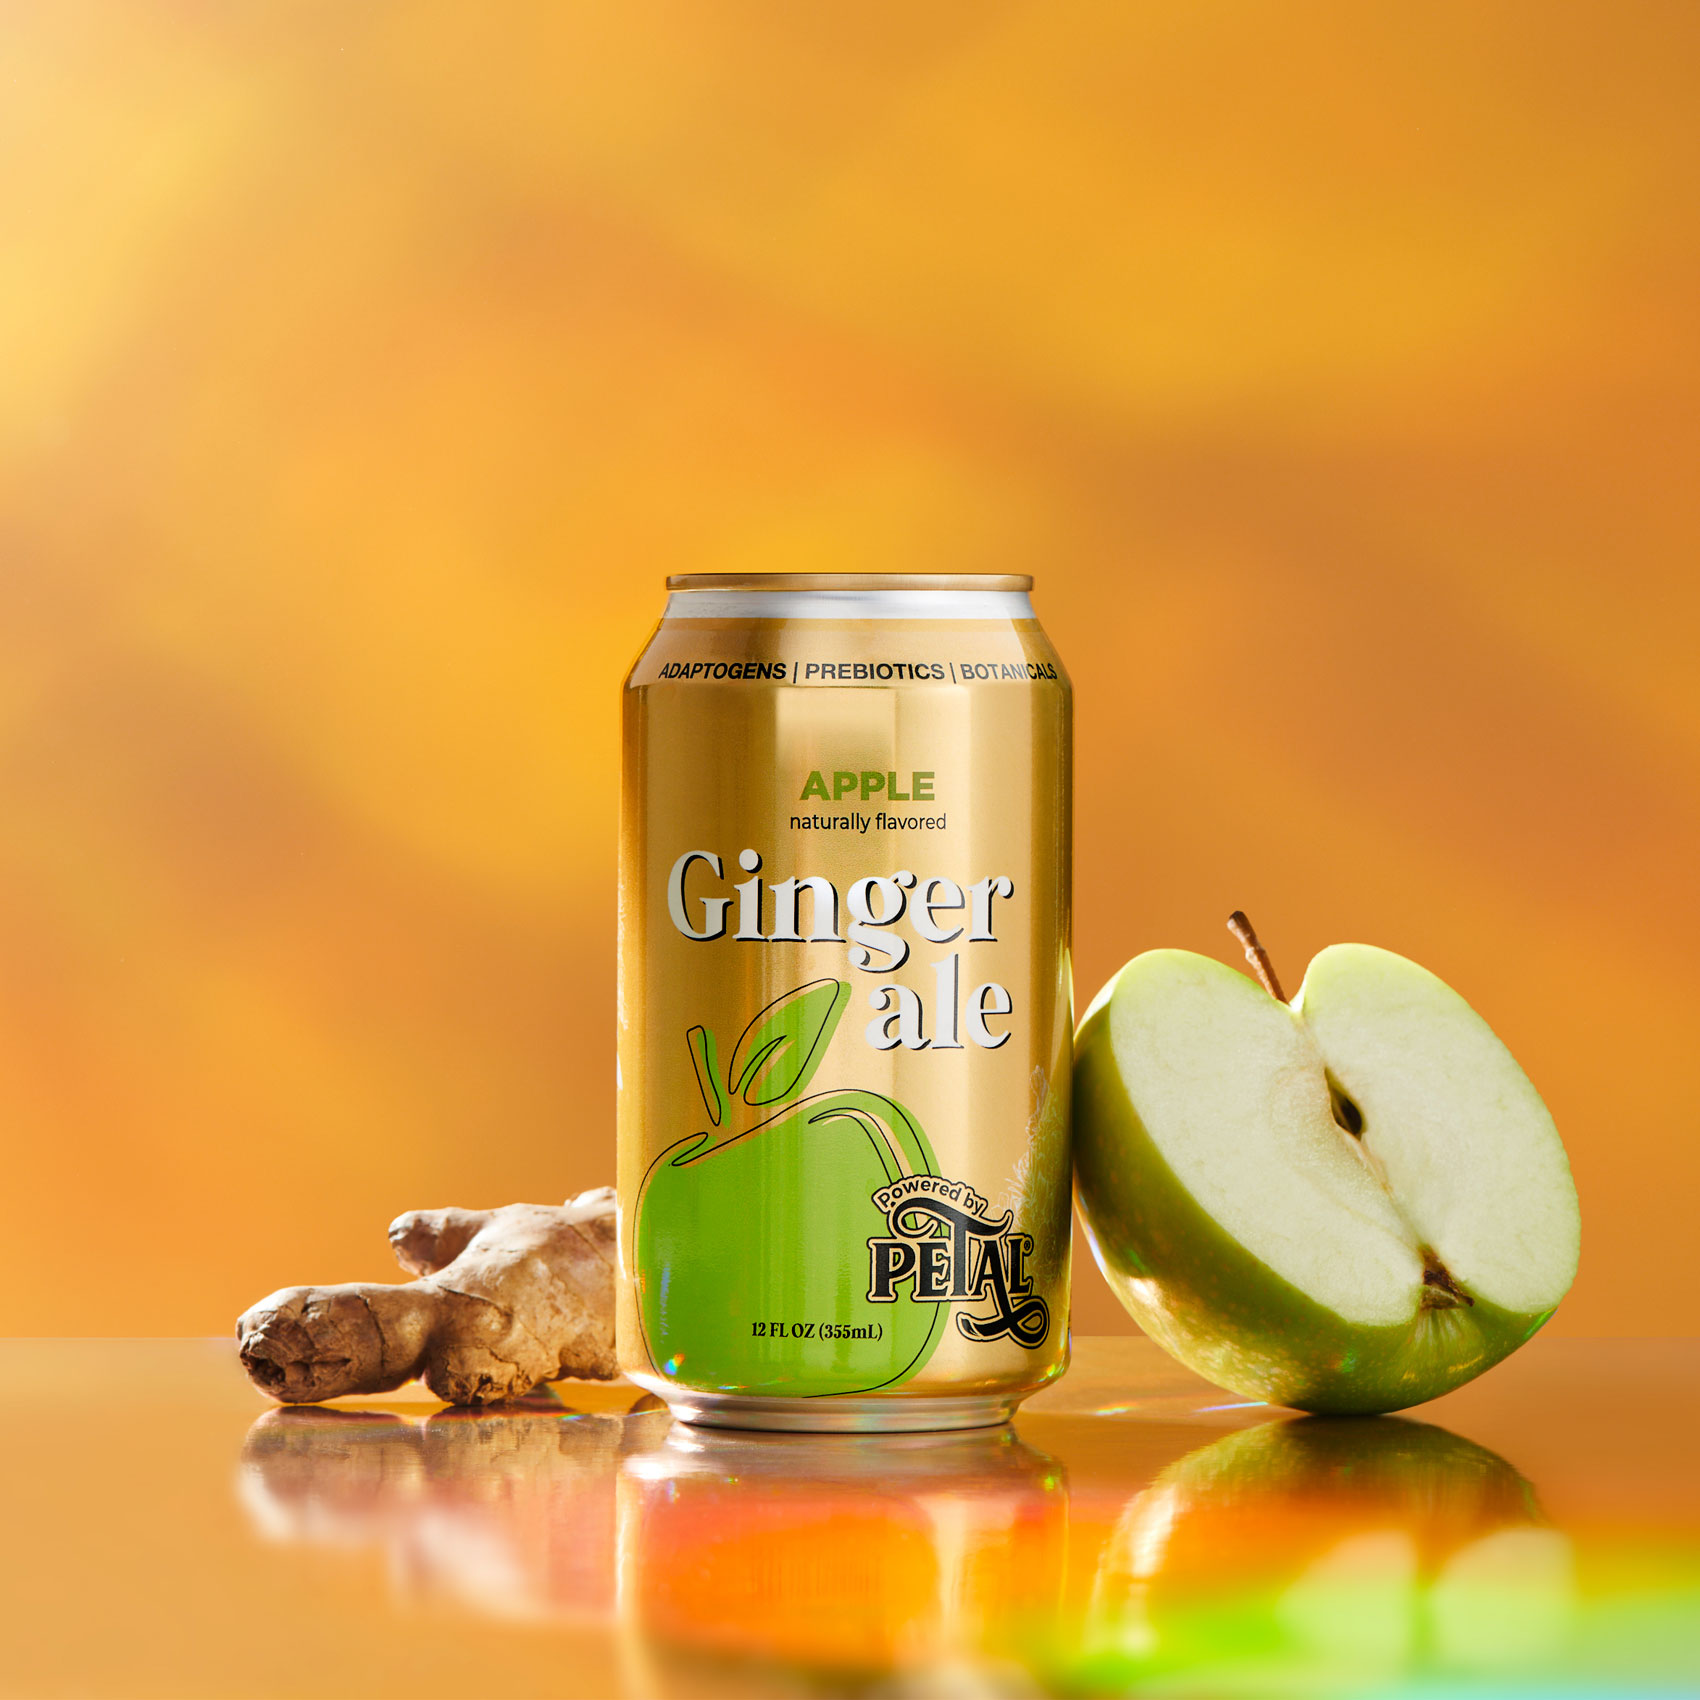 Can of apple ginger ale